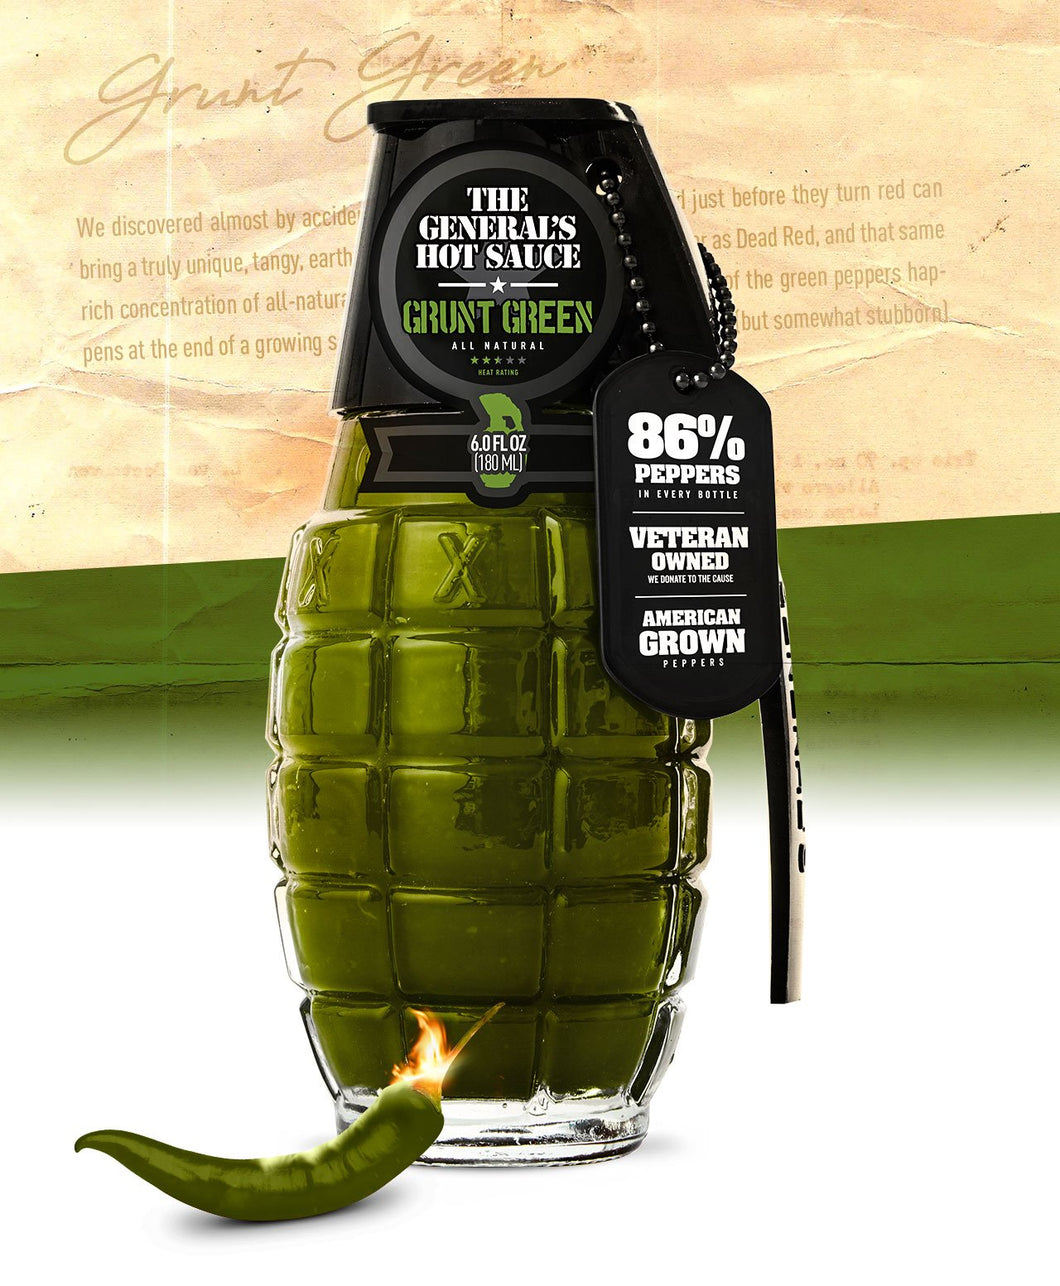 glass bottle in shape of hand grenade with green sauce